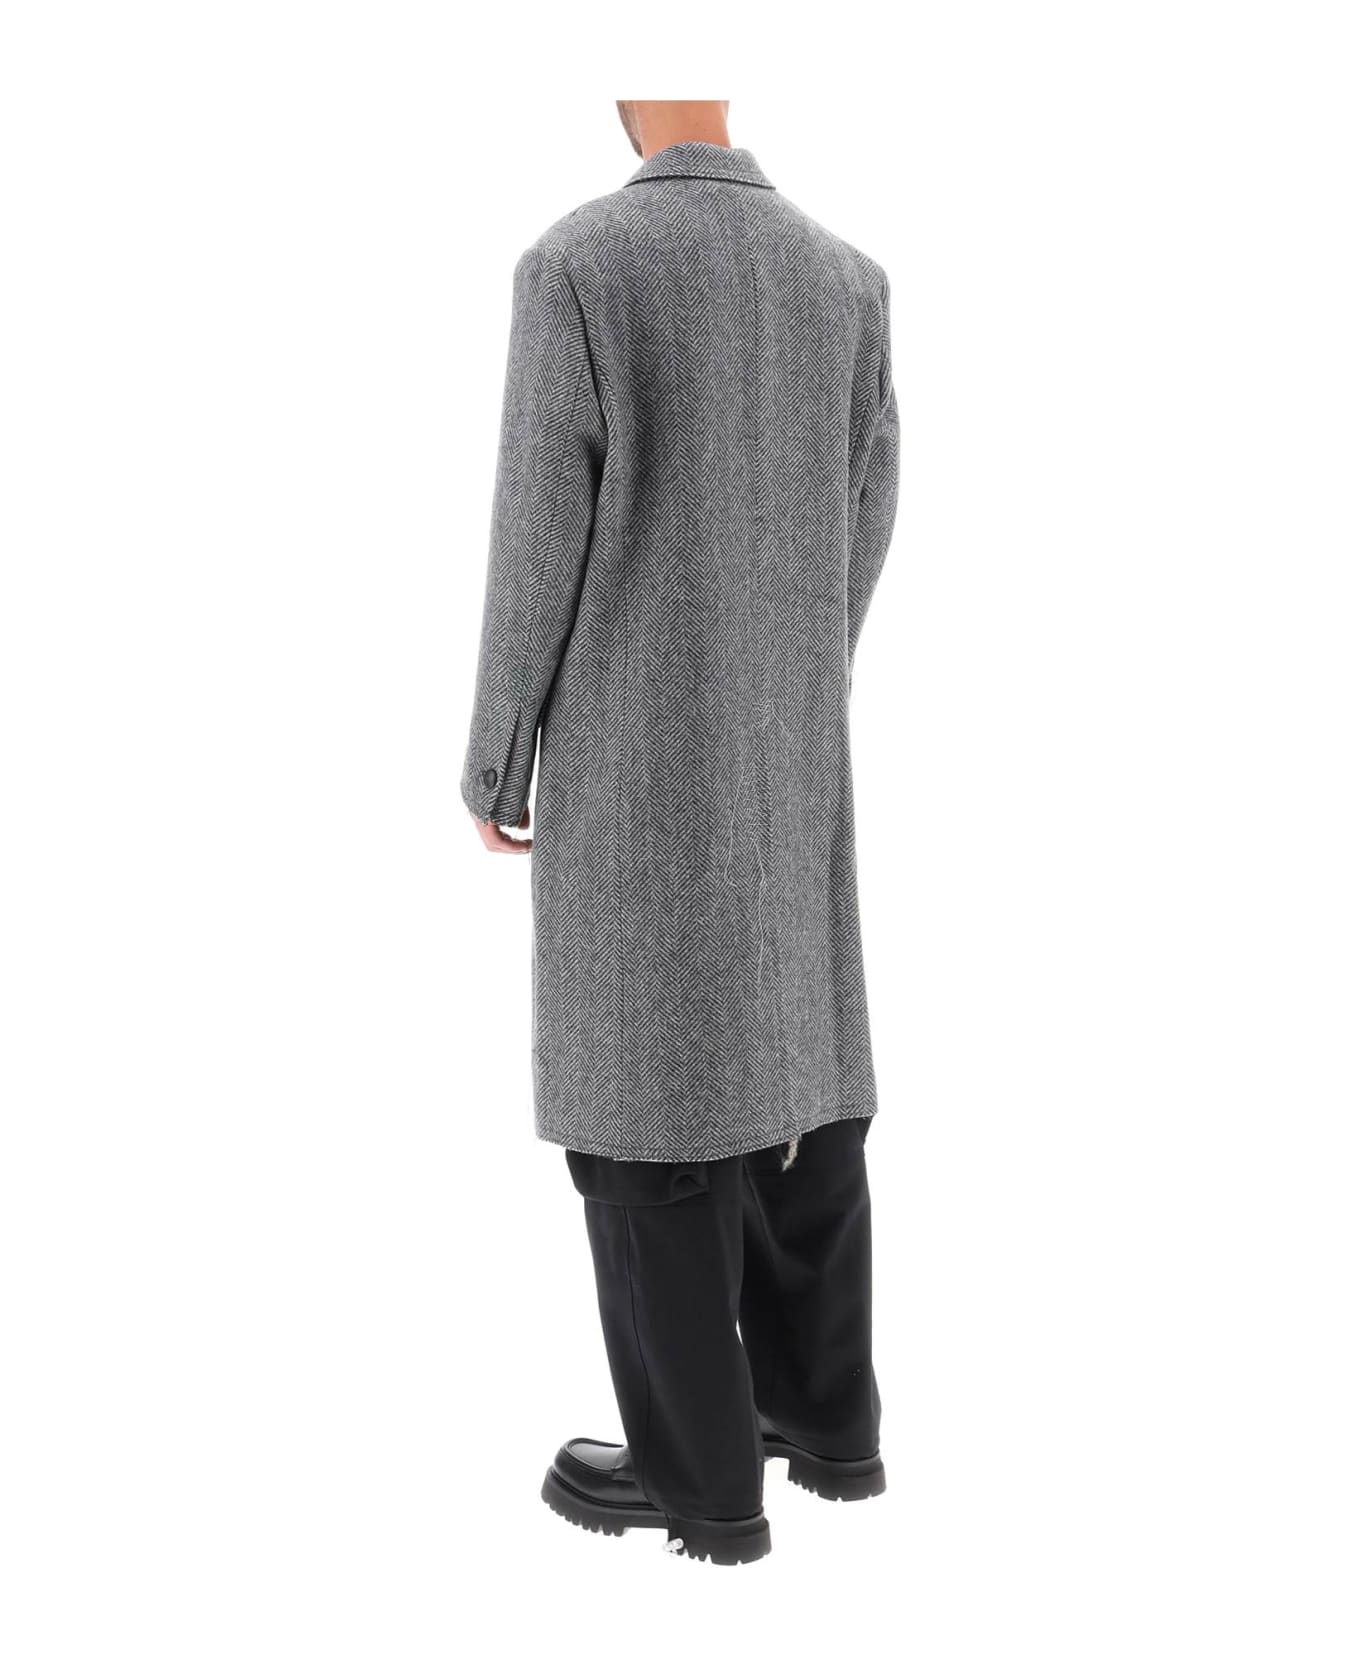 Andersson Bell 'moriens' Double-breasted Coat - GREY (Grey)